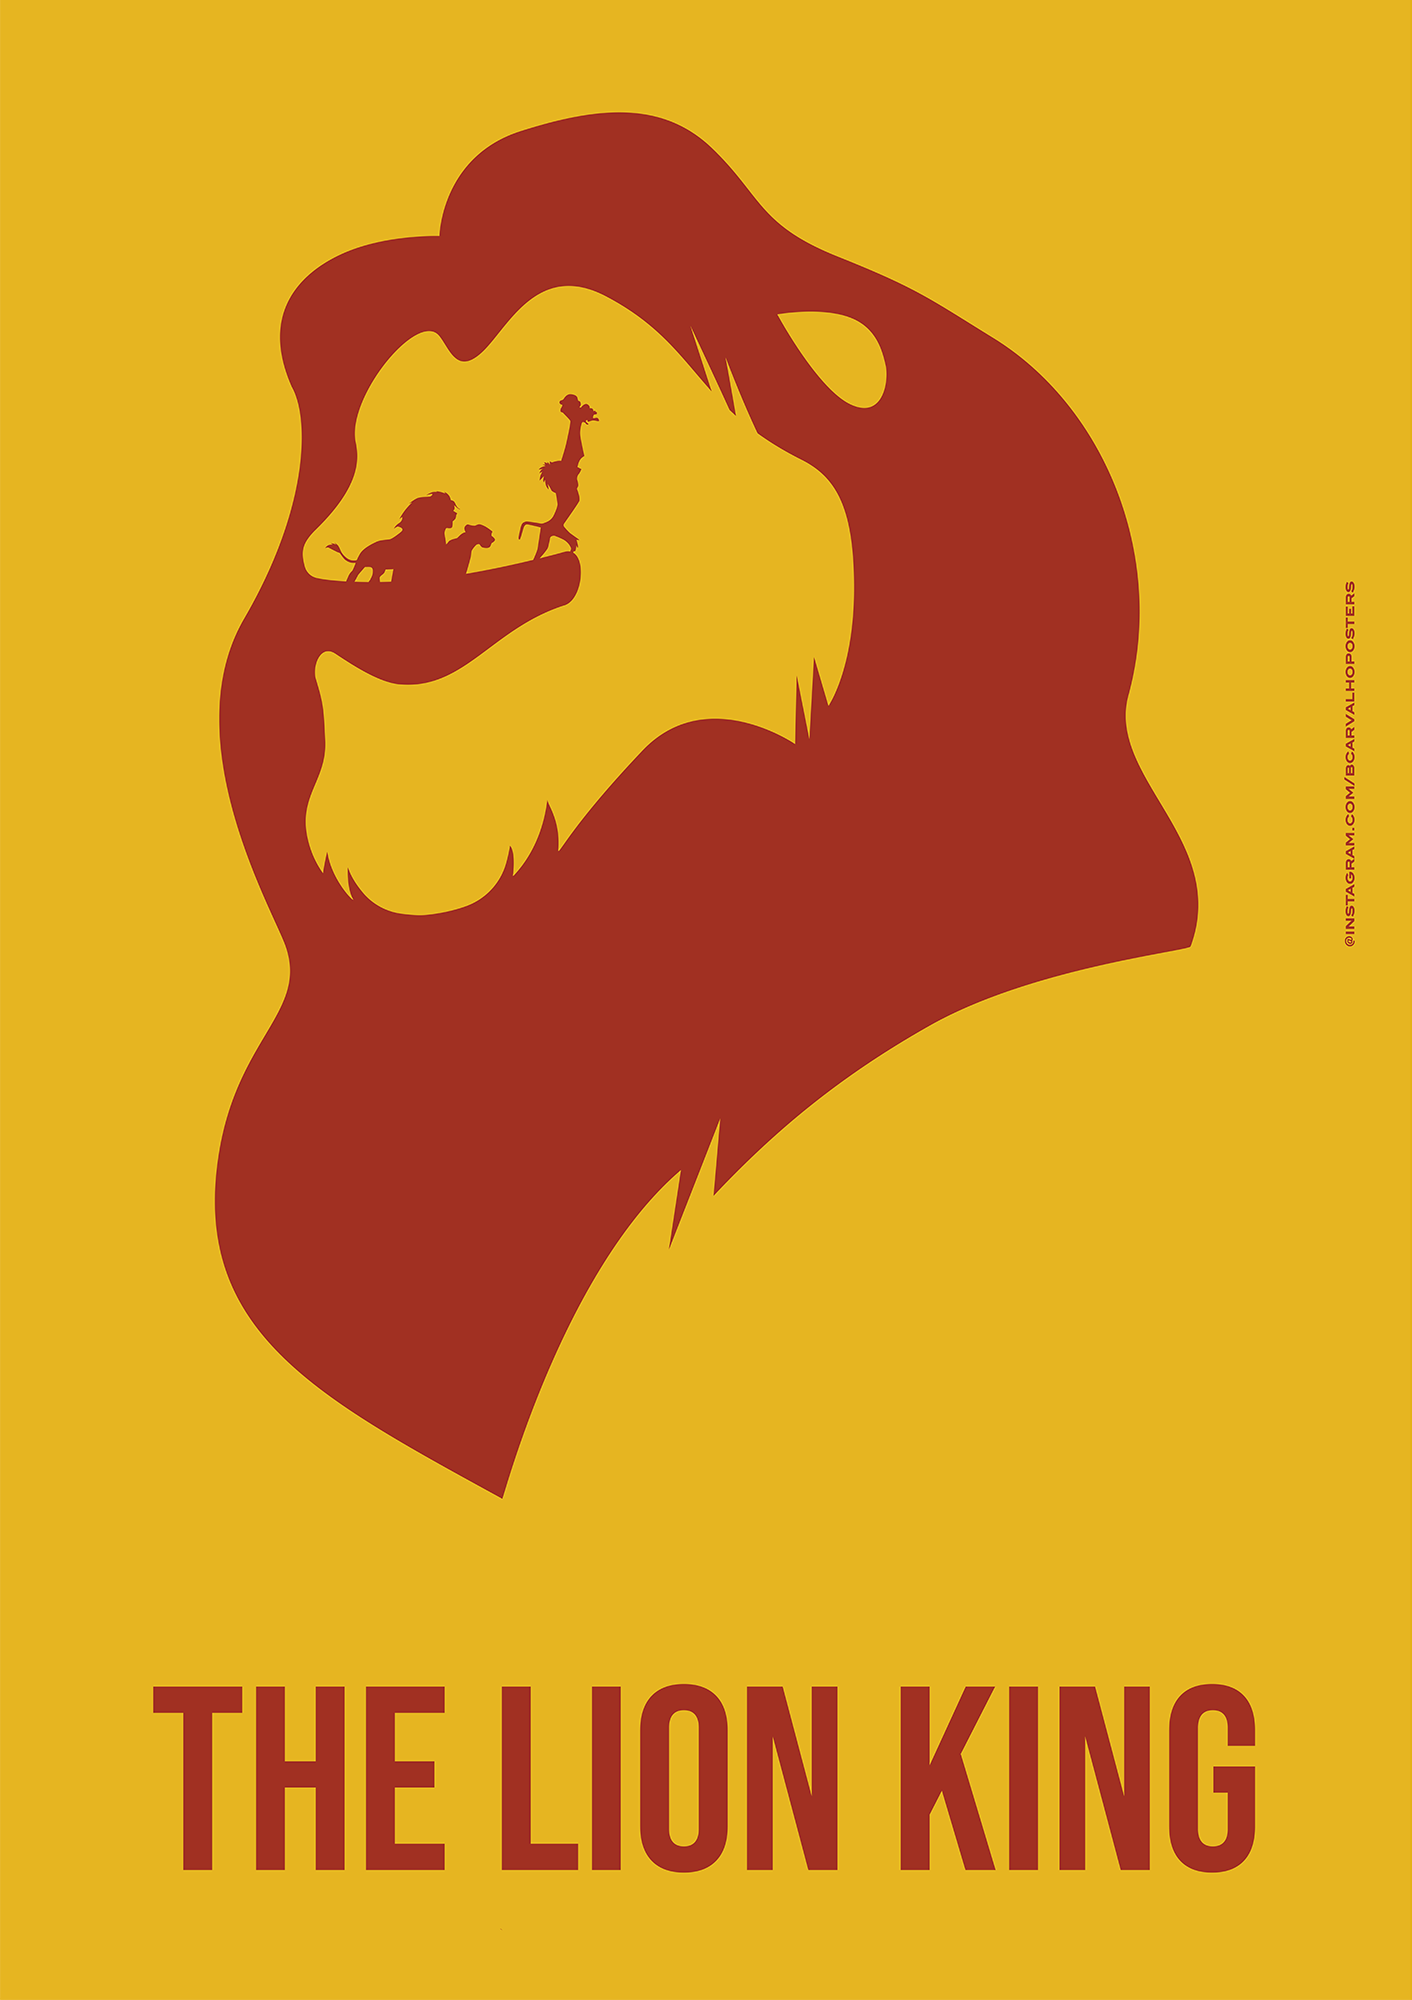 The lion king Minimalist Poster